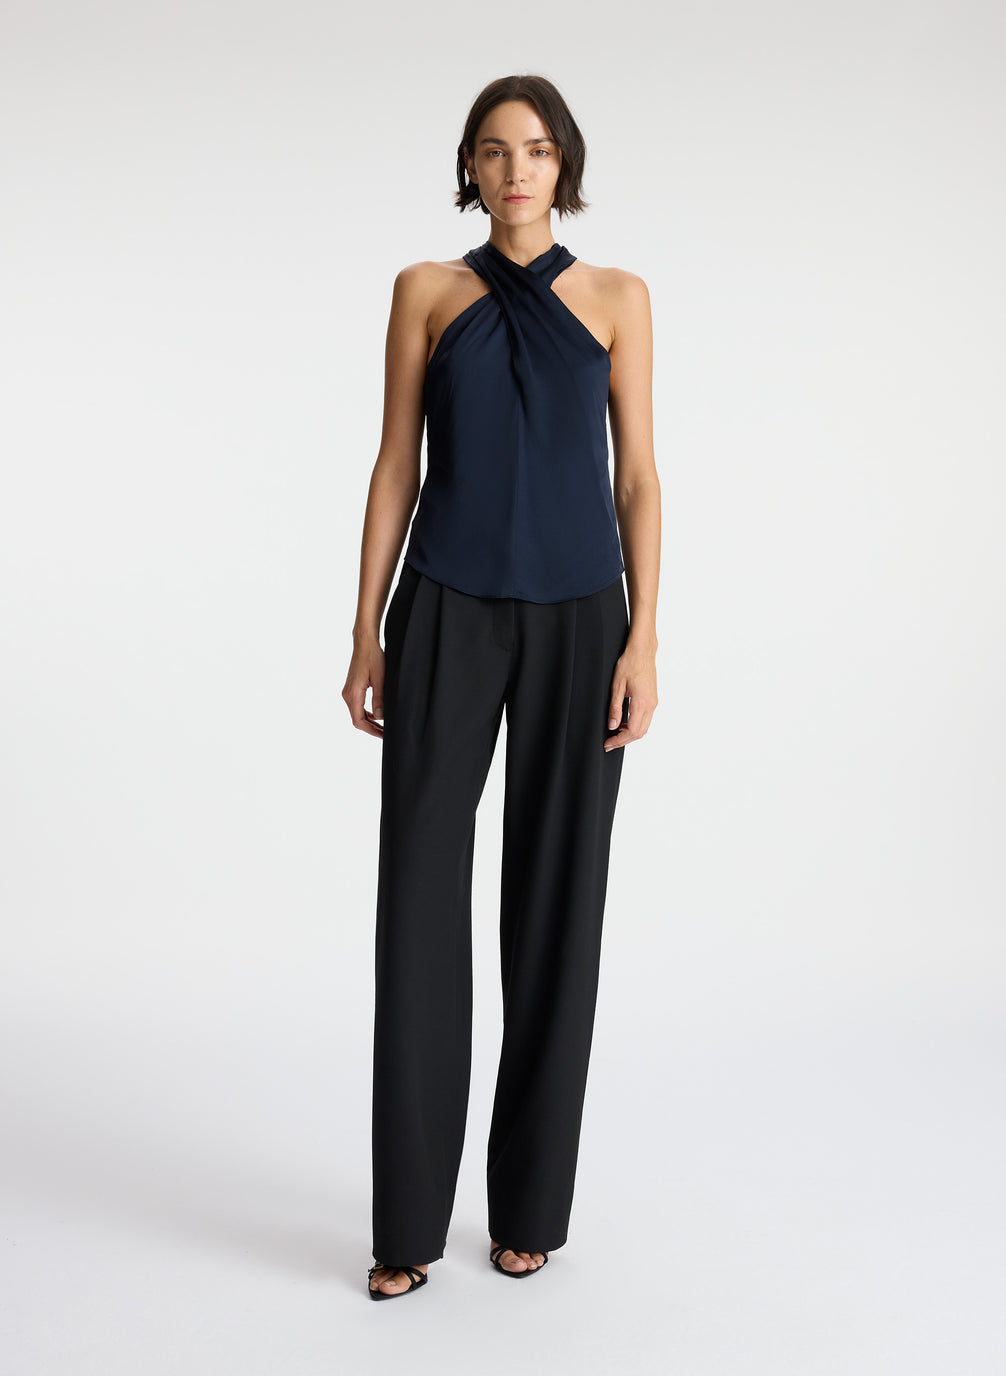 front view of woman wearing navy blue satin halter top with black pants